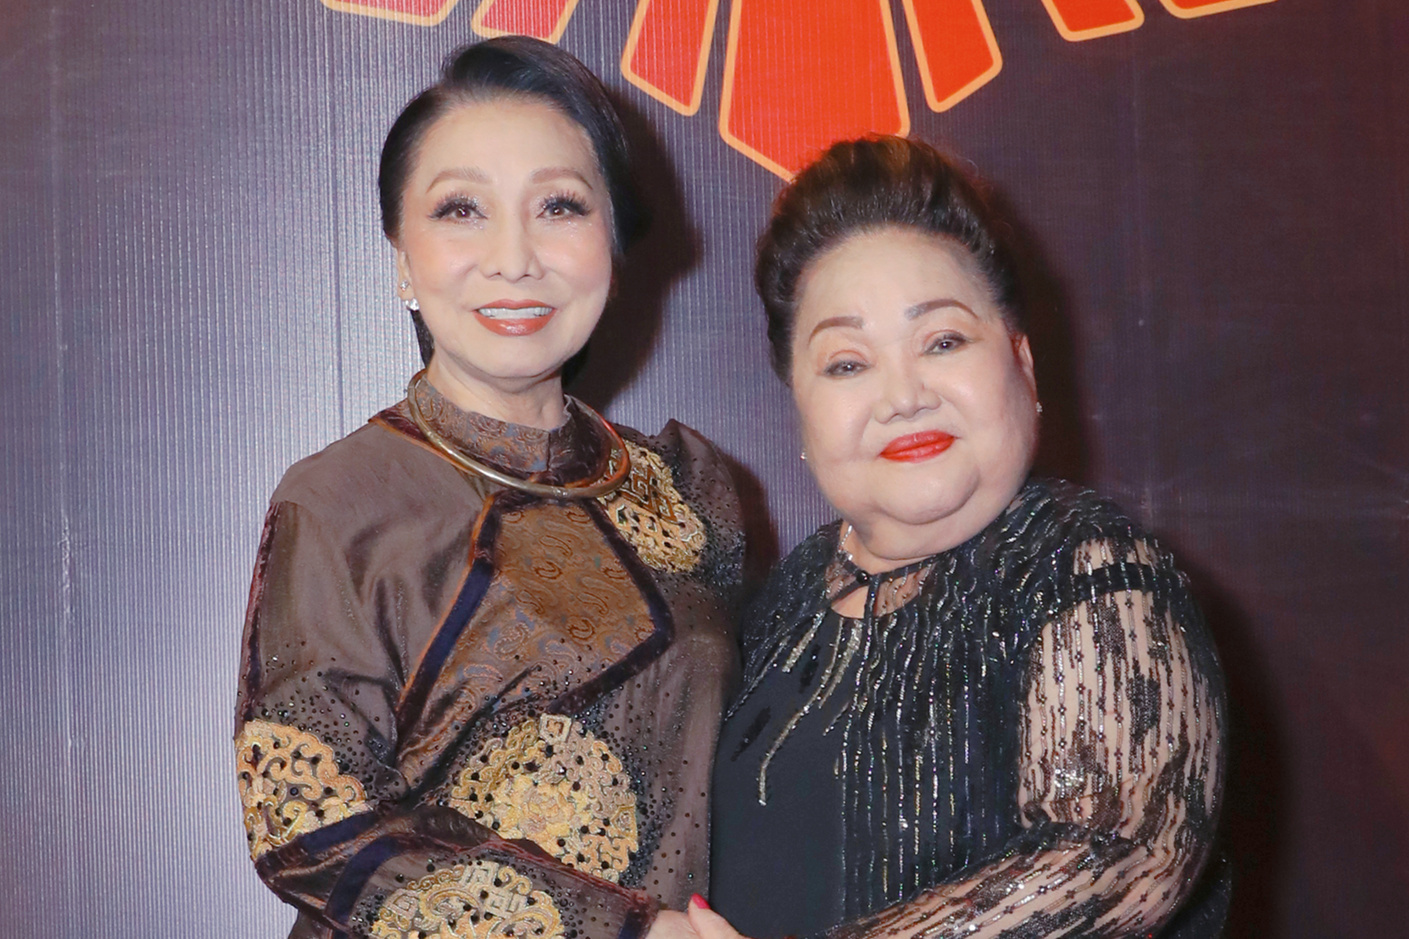 People's Artist Bach Tuyet at the age of U80 is young and hard to imagine